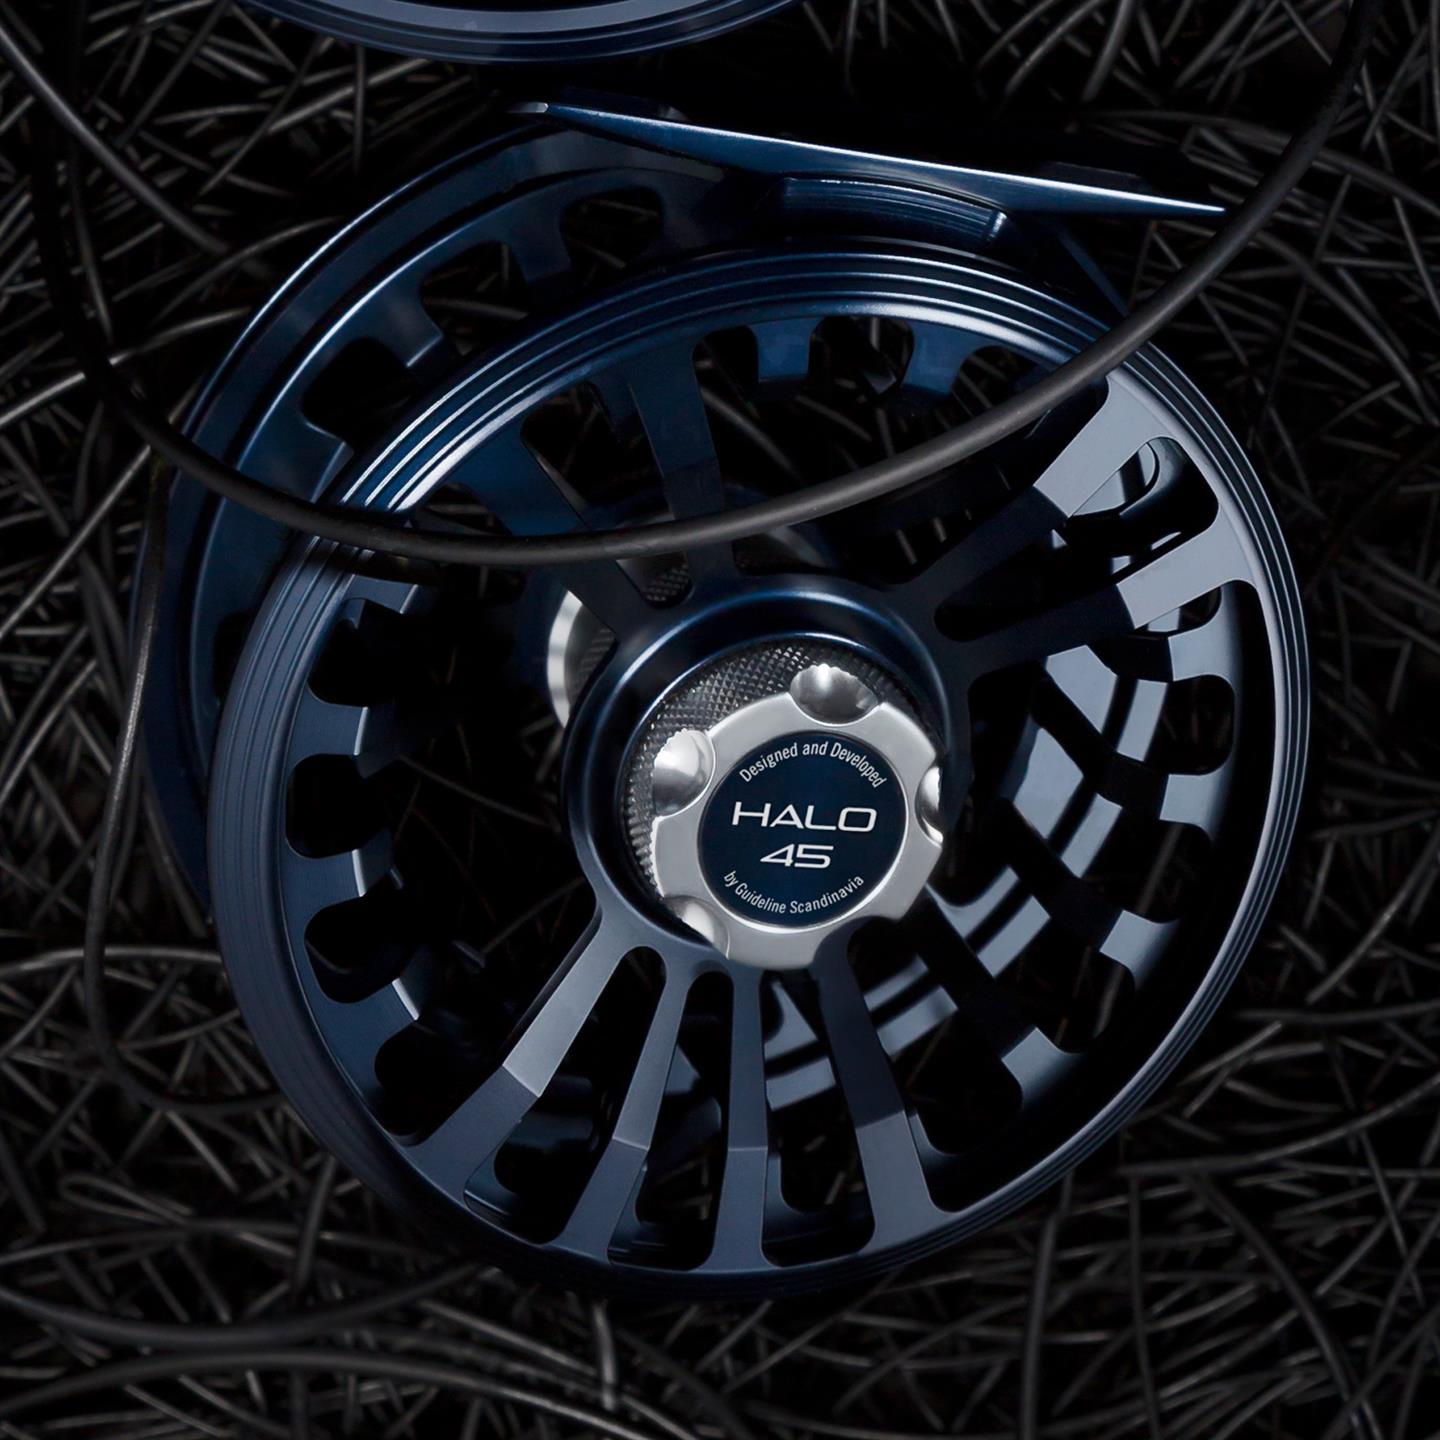 Guideline Halo Dark Grey Sapphire Blue #2/3 #8/9 Fly reel Fly fishing NEW 2019 